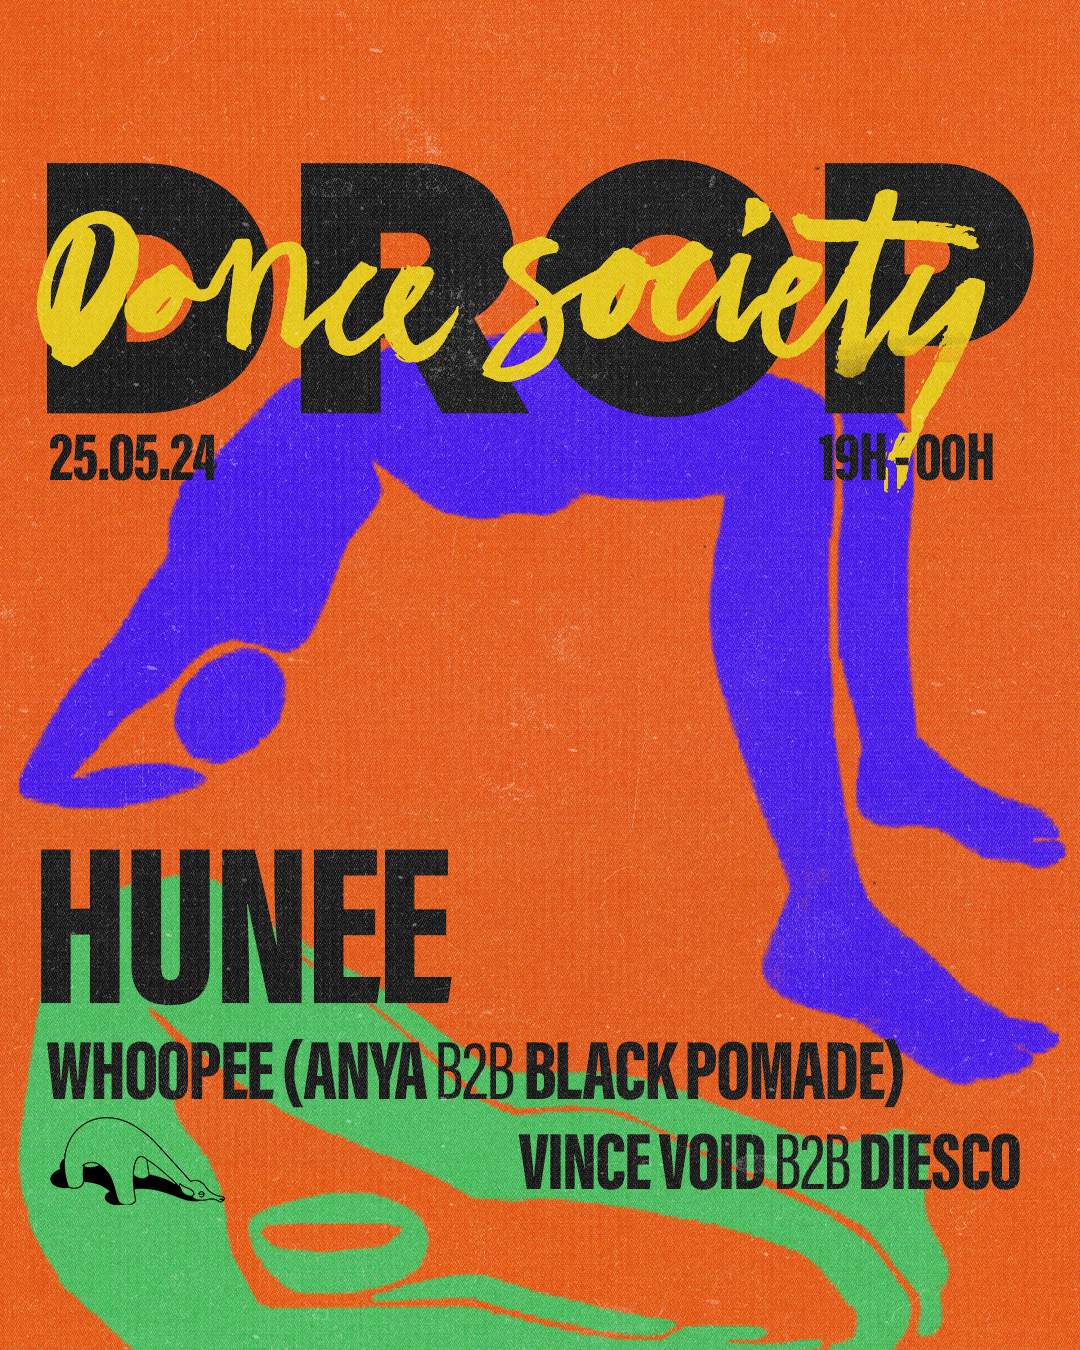 *** SOLD OUT *** DROP Open-Air Invites Hunee - Página trasera